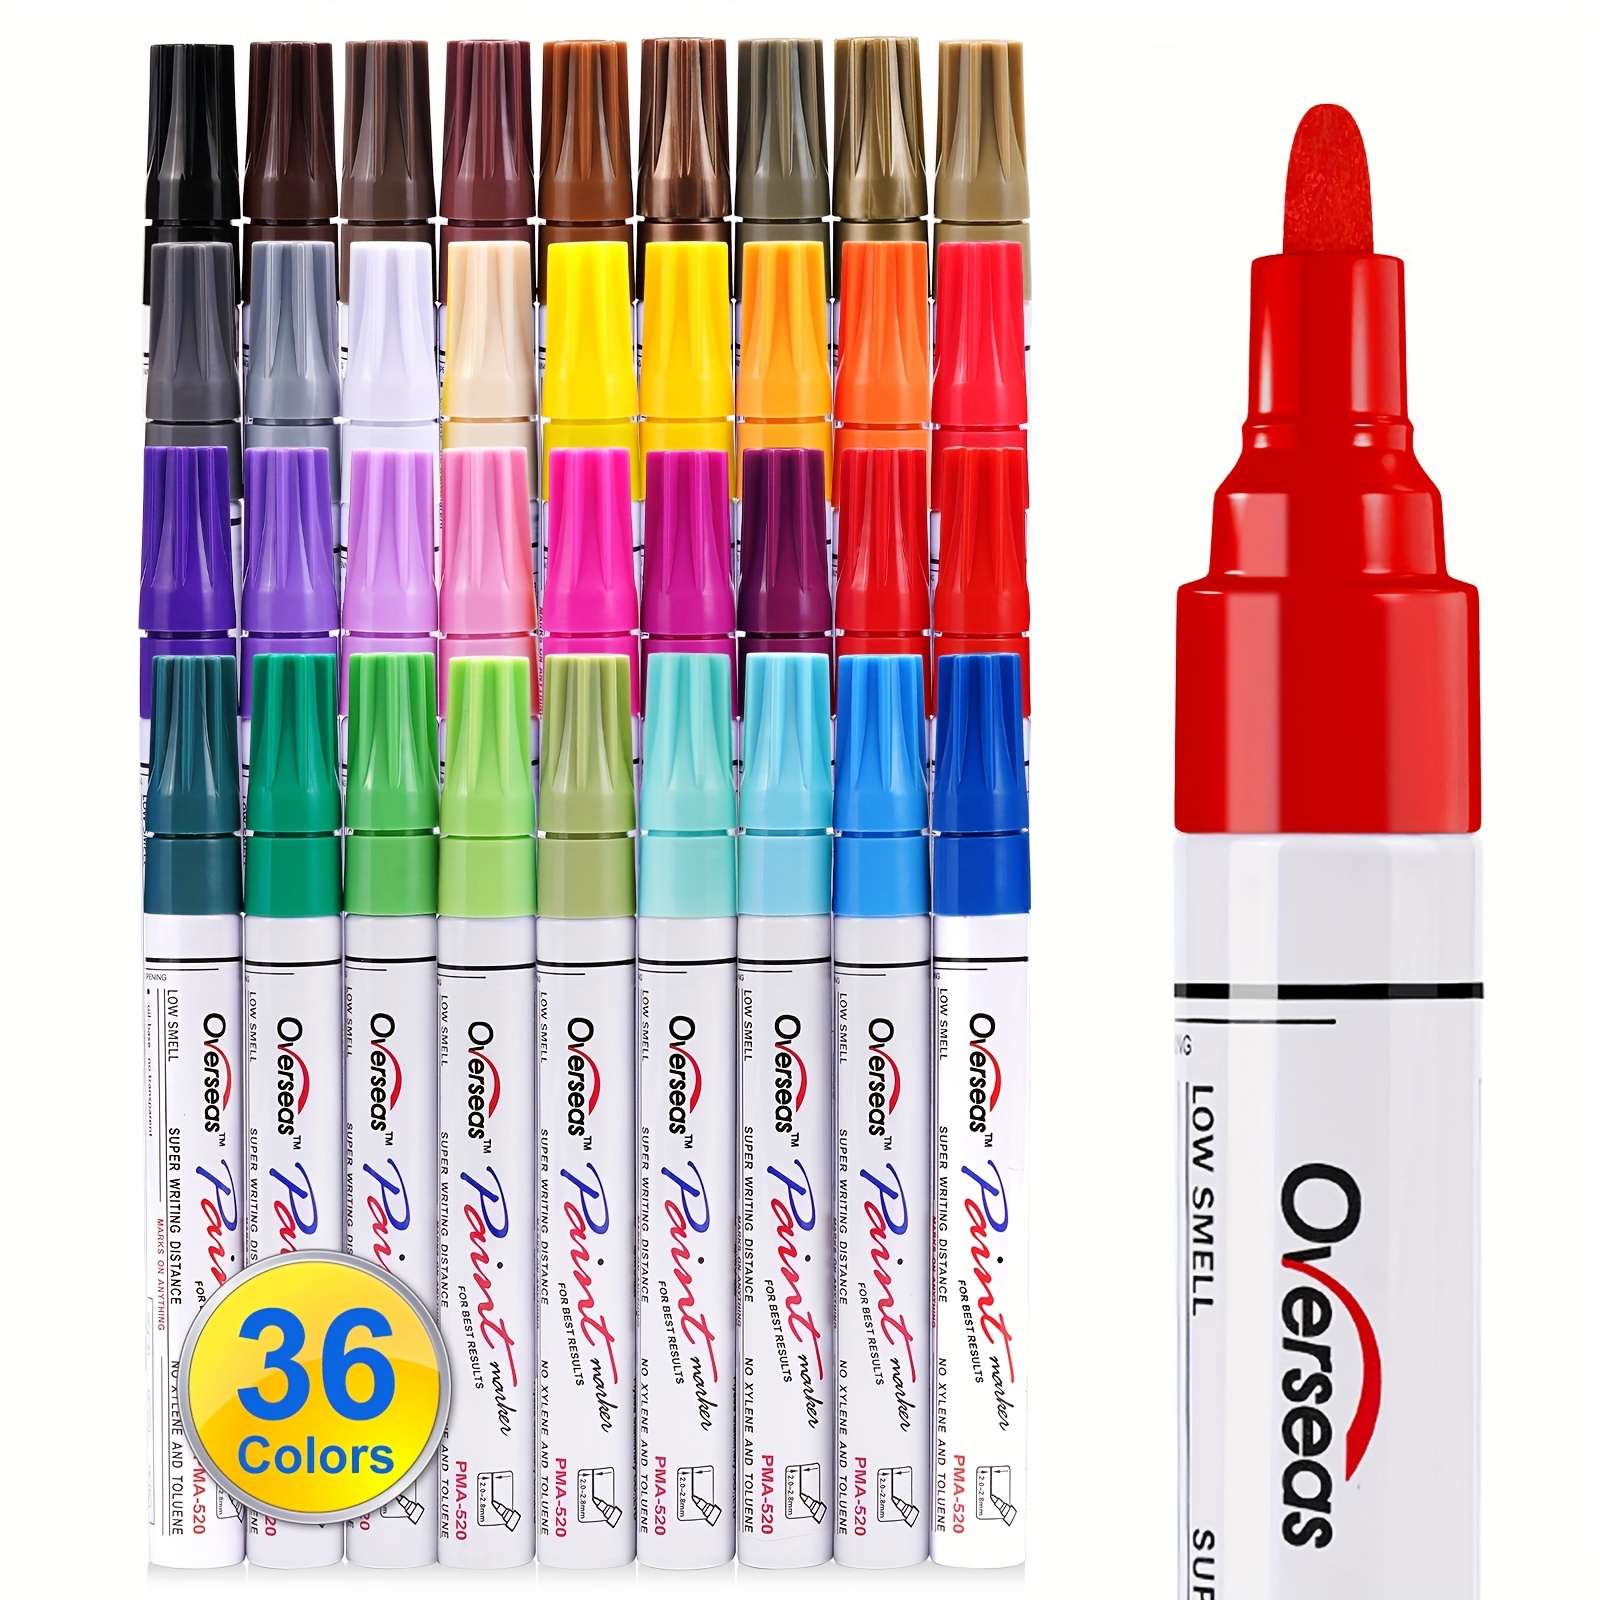 ARTISTRO 15 Oil Based Paint markers for Wood, Rock, Fabric, Glass -  Permanent, Quick Dry, Waterproof - Oil paint pens for Ceramic, Mugs, Metal